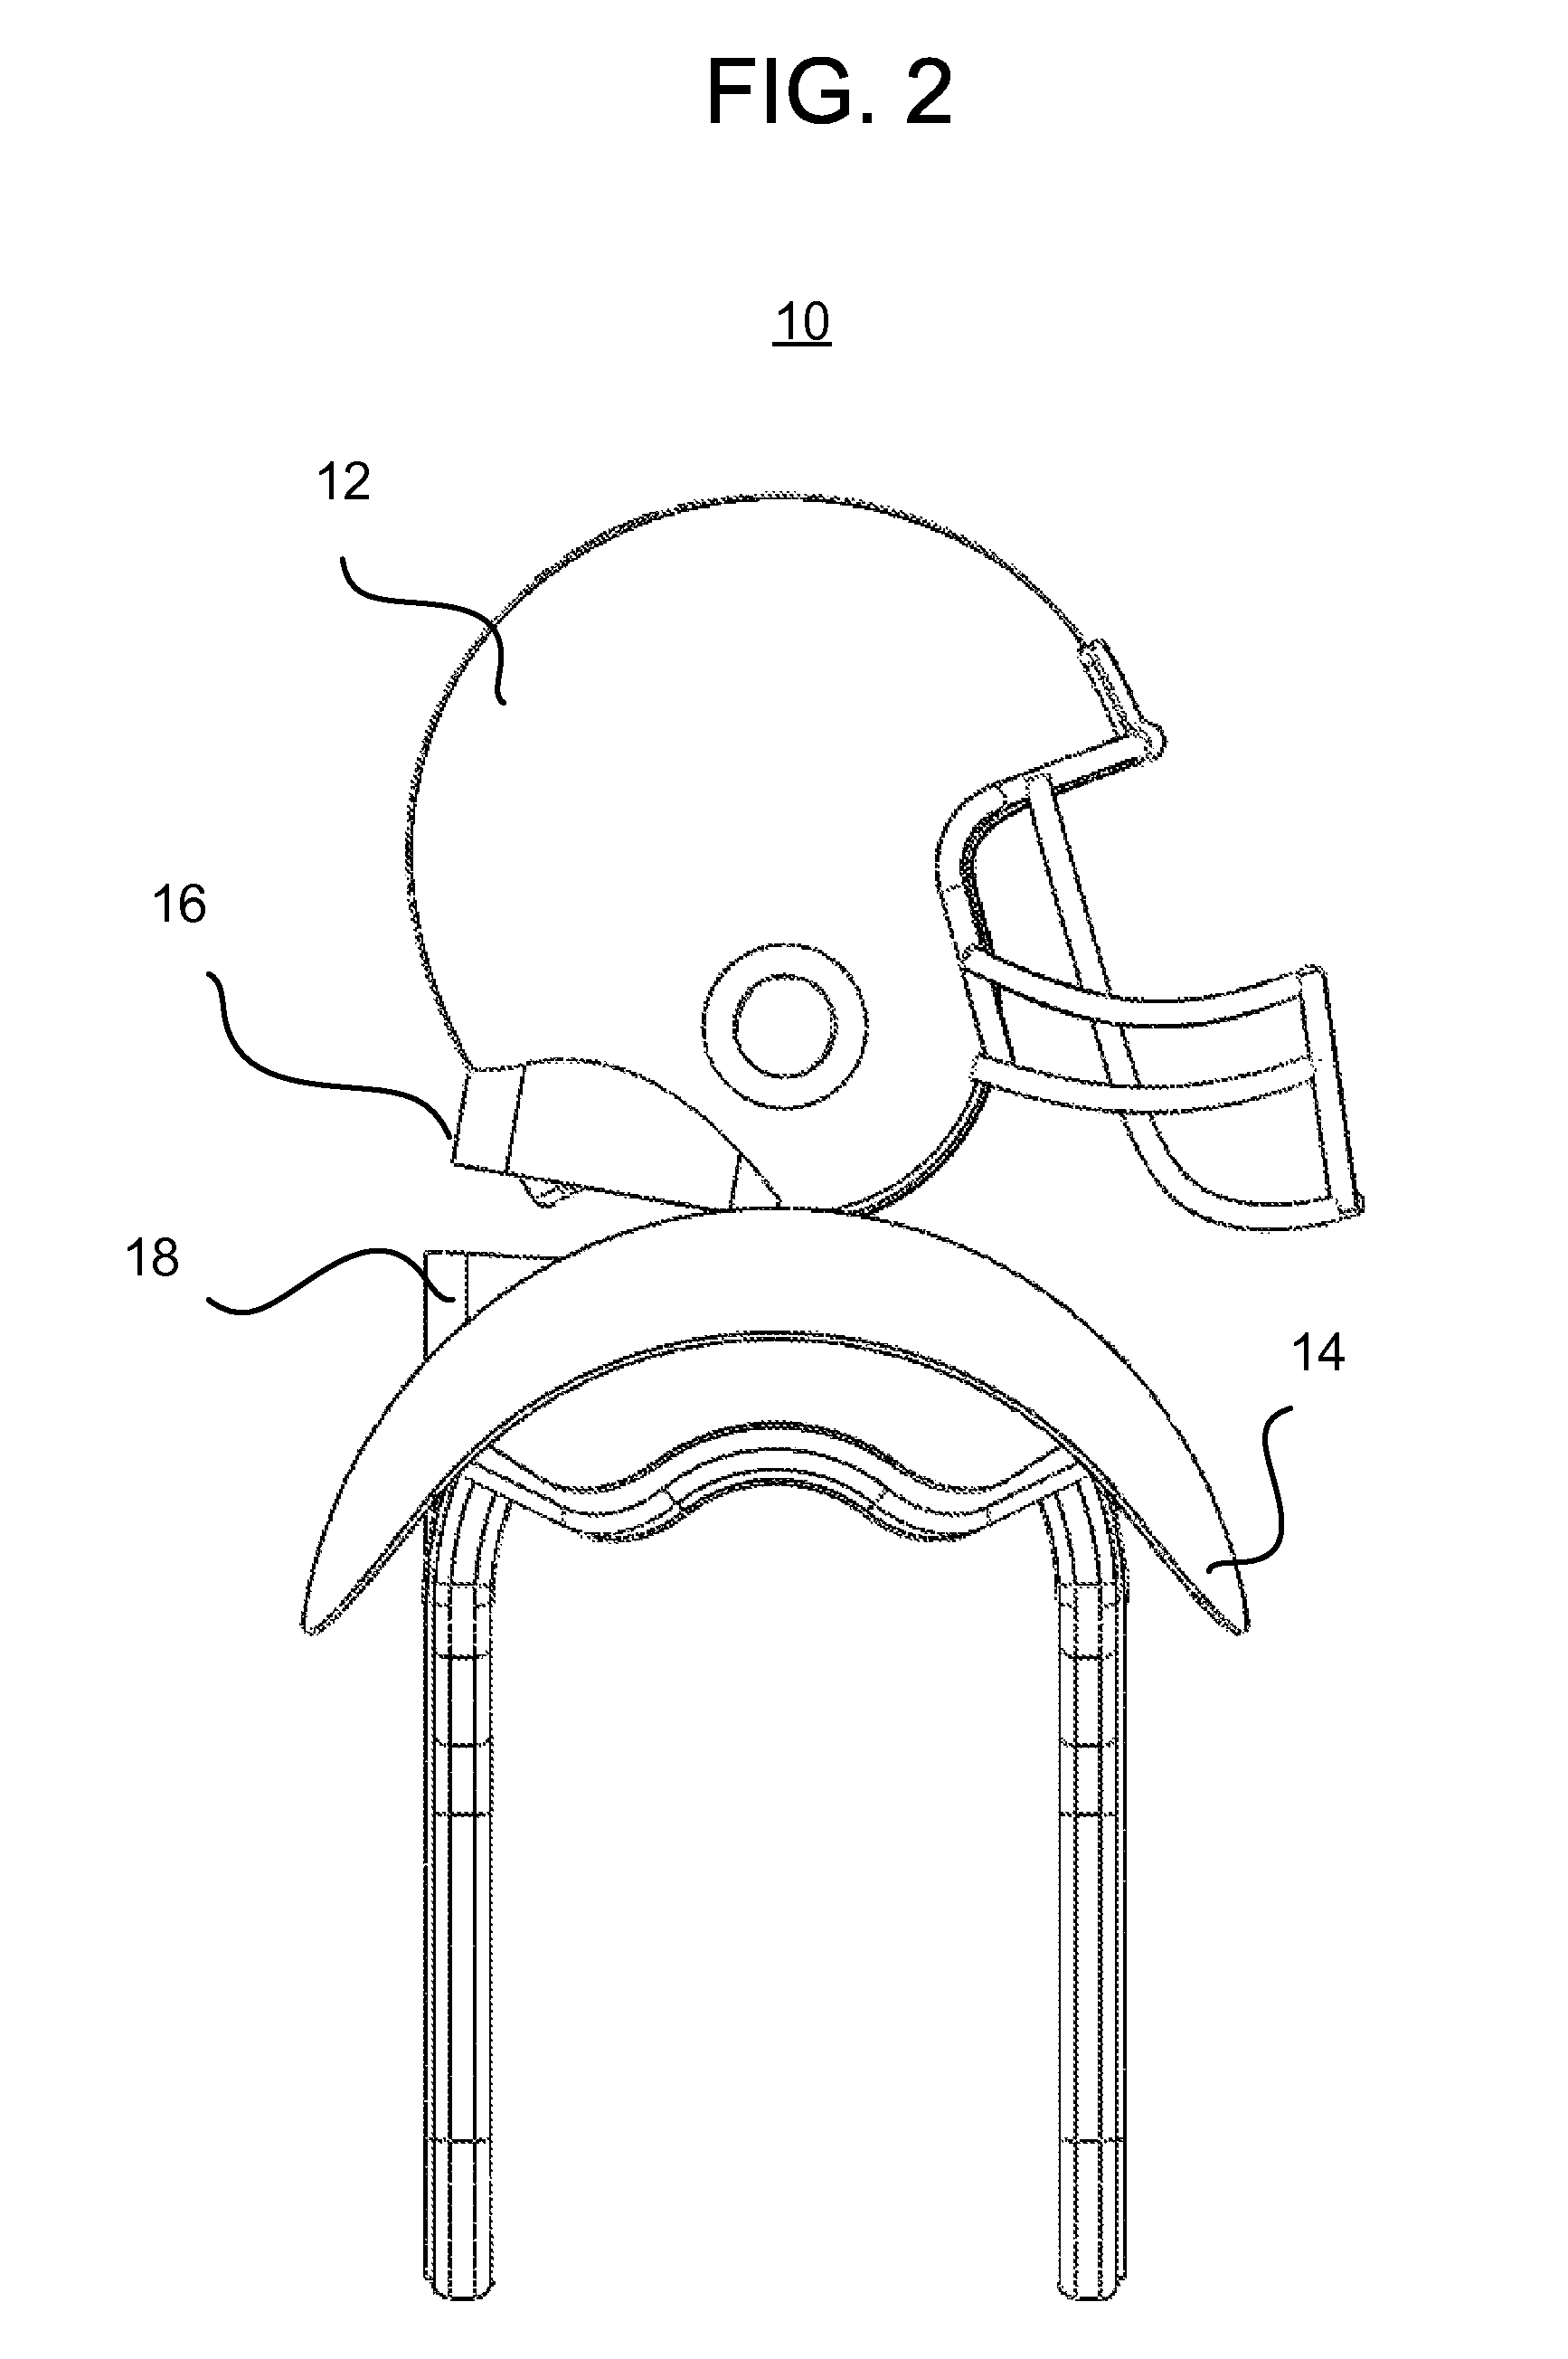 Apparatus for preventing head or neck injury using magnetic assistance